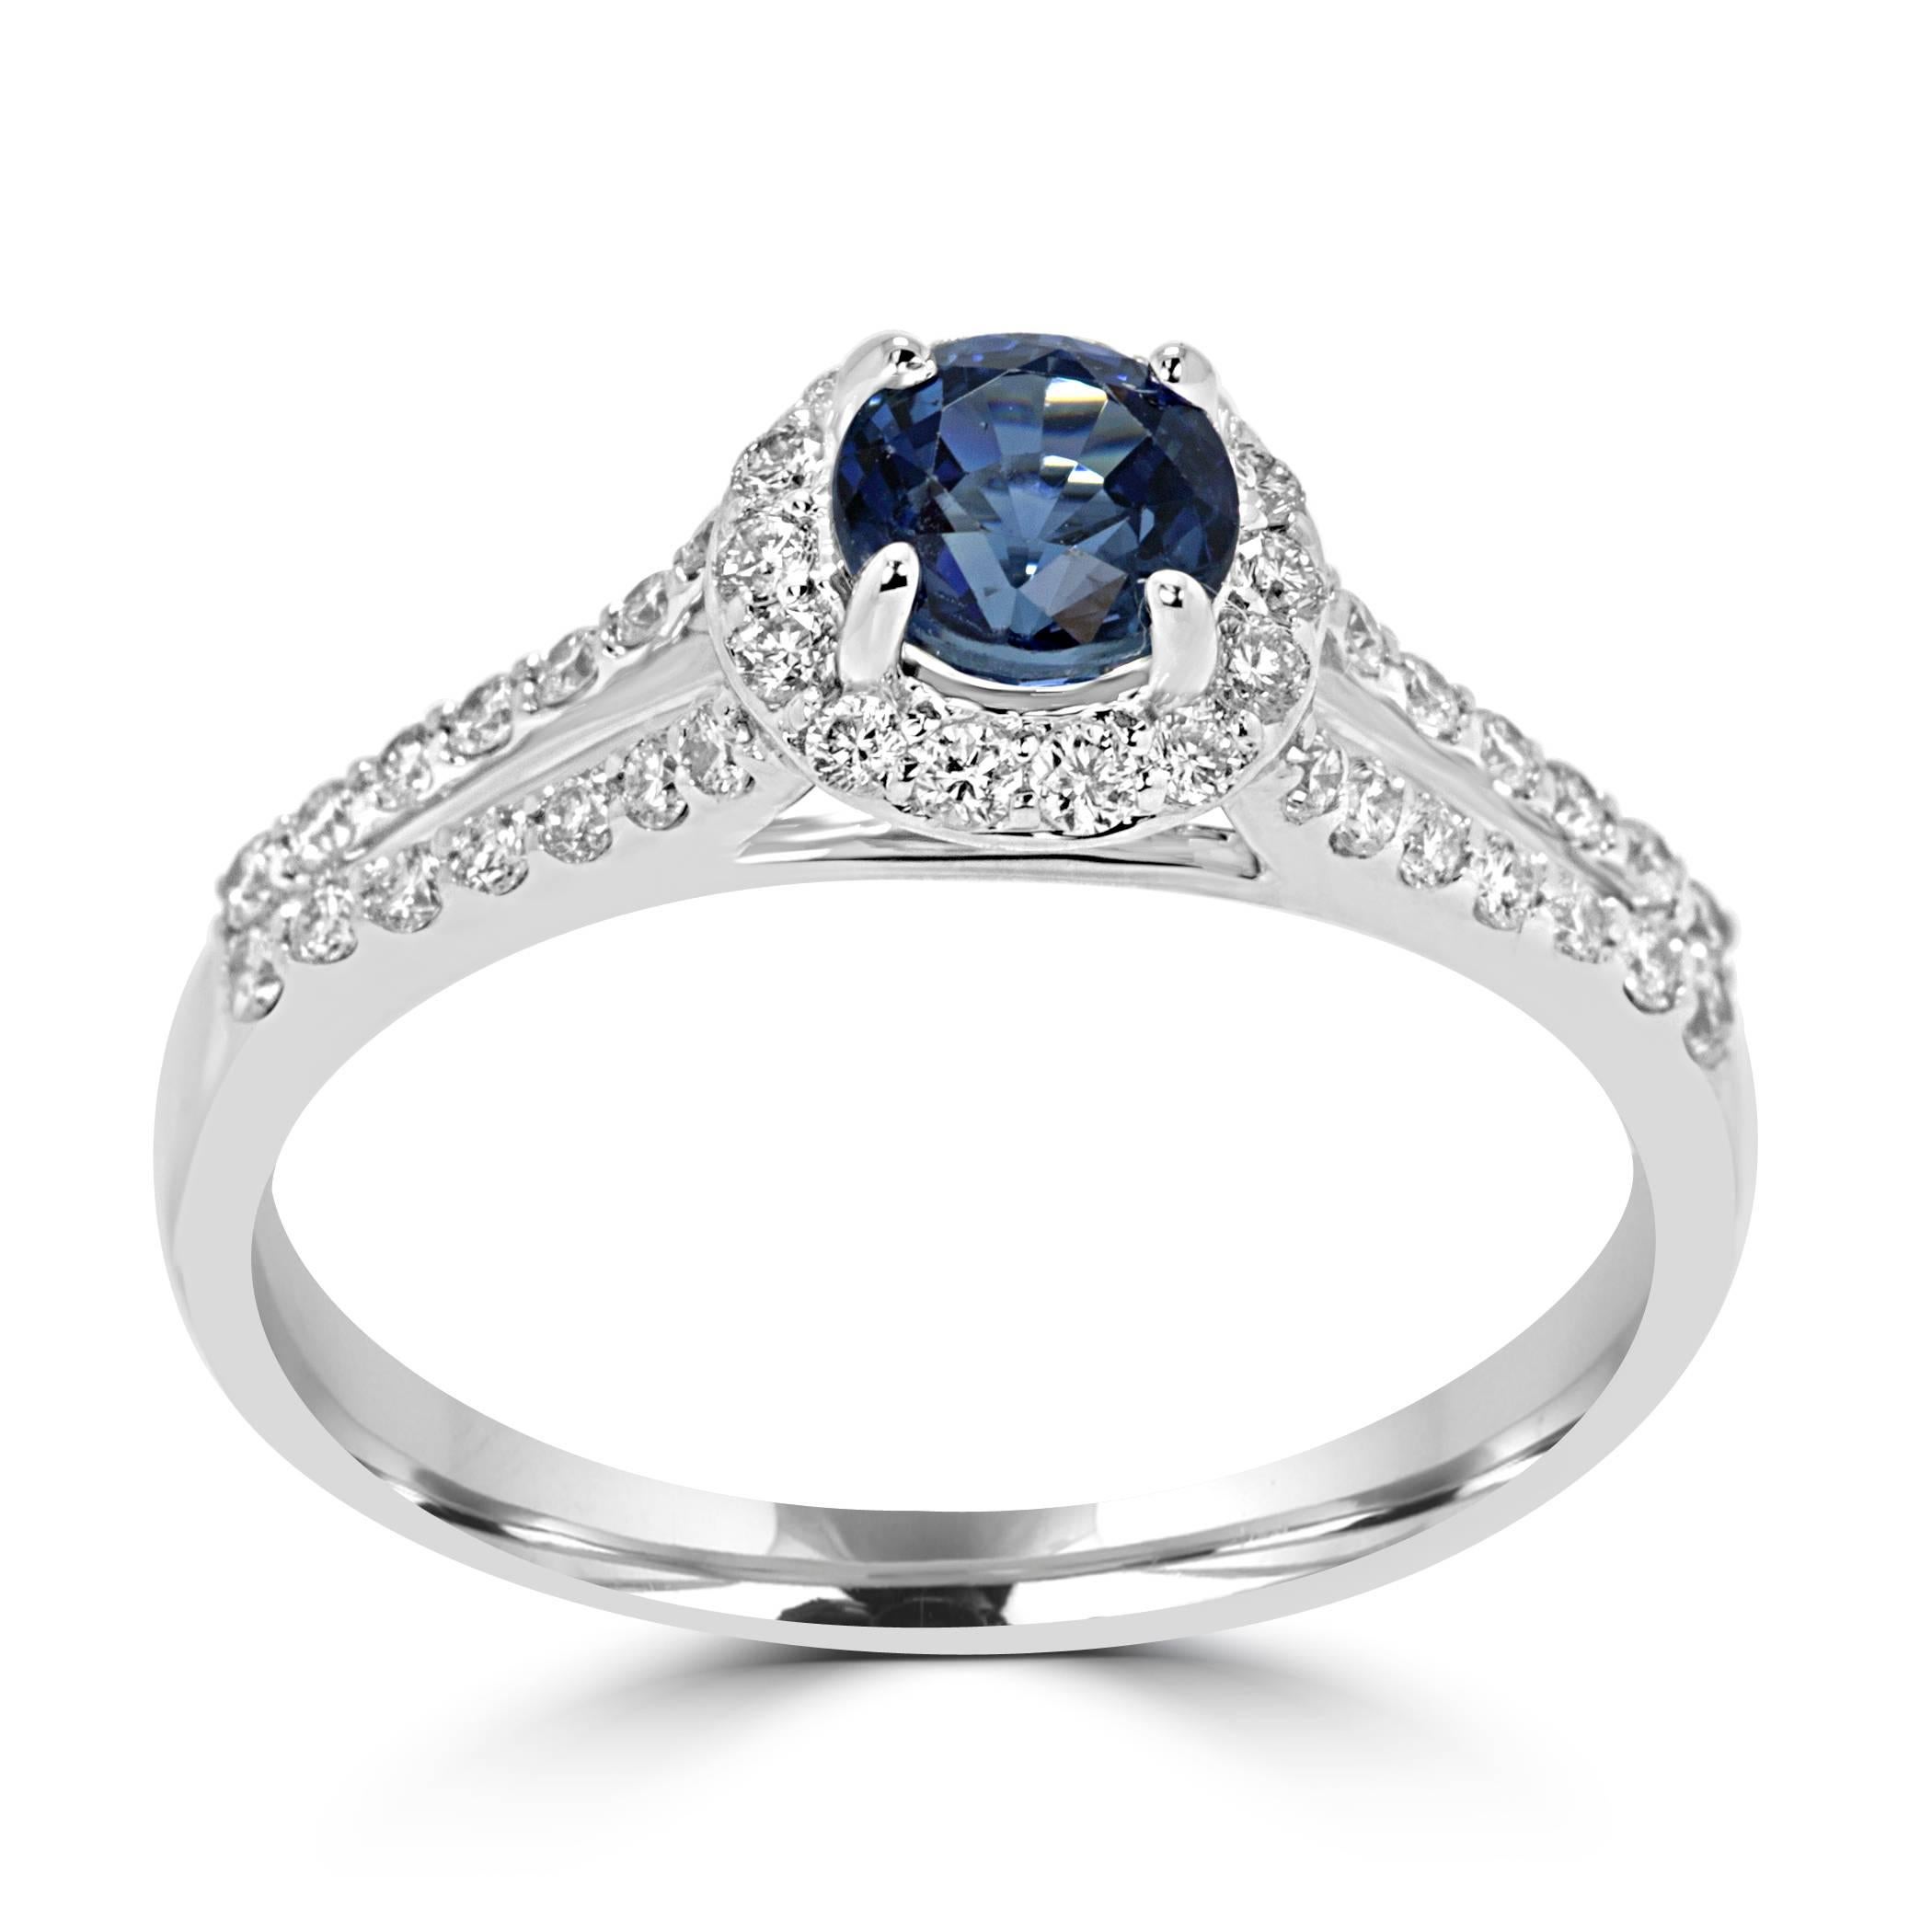 Sapphire Round Diamond Cut 0.79 Carat Encircled in White Diamond Round 0.40 carat in a simple and classic split shank 14K White Gold Ring.

Total Stone Weight 1.19 Carat